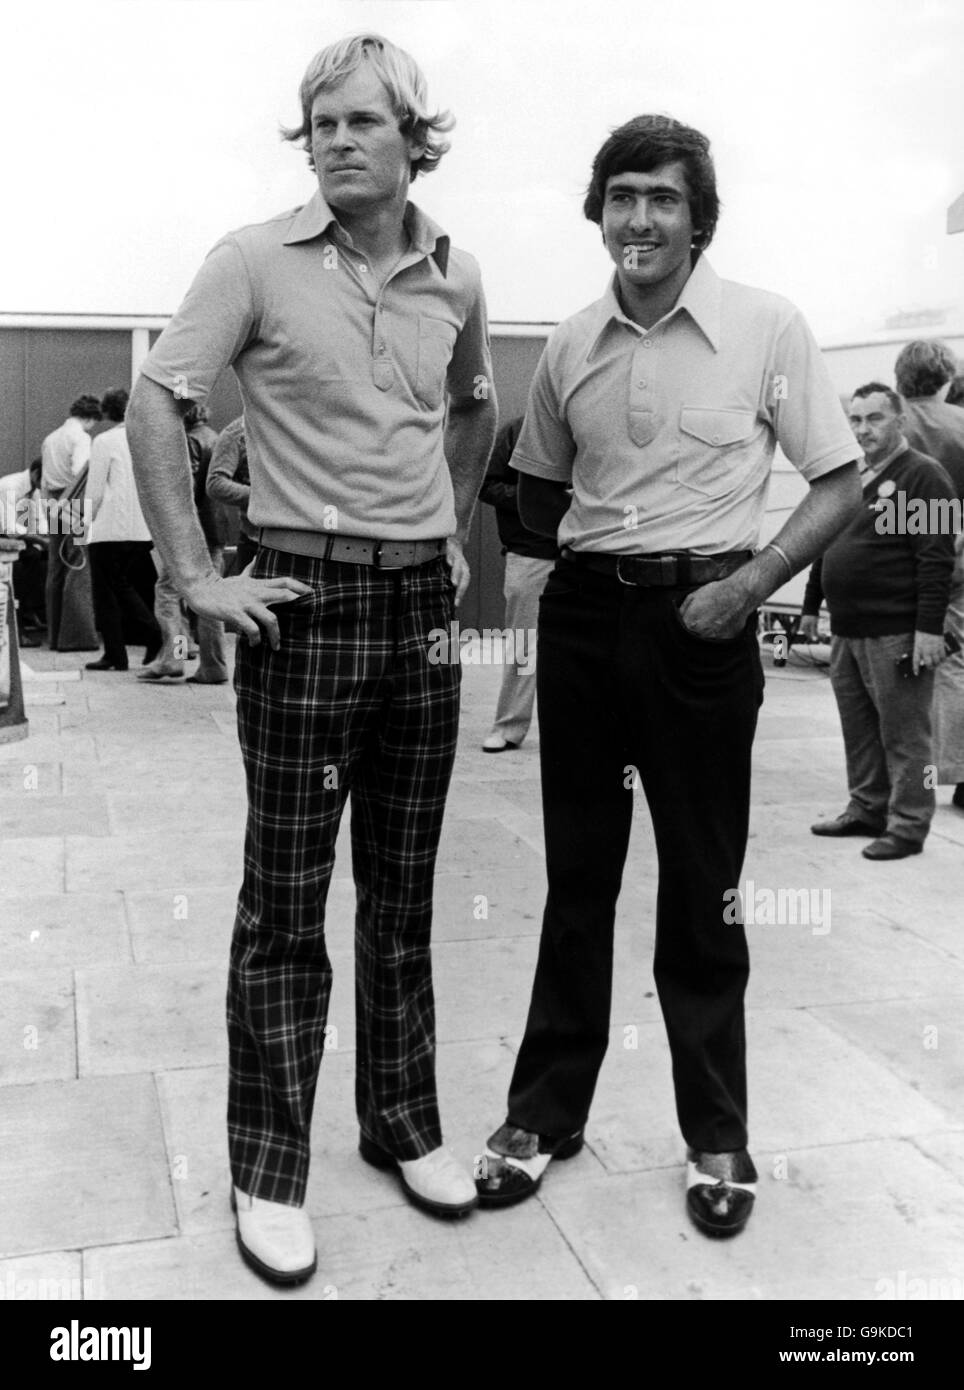 Golf - The Open Championship - Royal Birkdale. Open champion Johnny Miller (l) with runner up Seve Ballesteros (r) Stock Photo